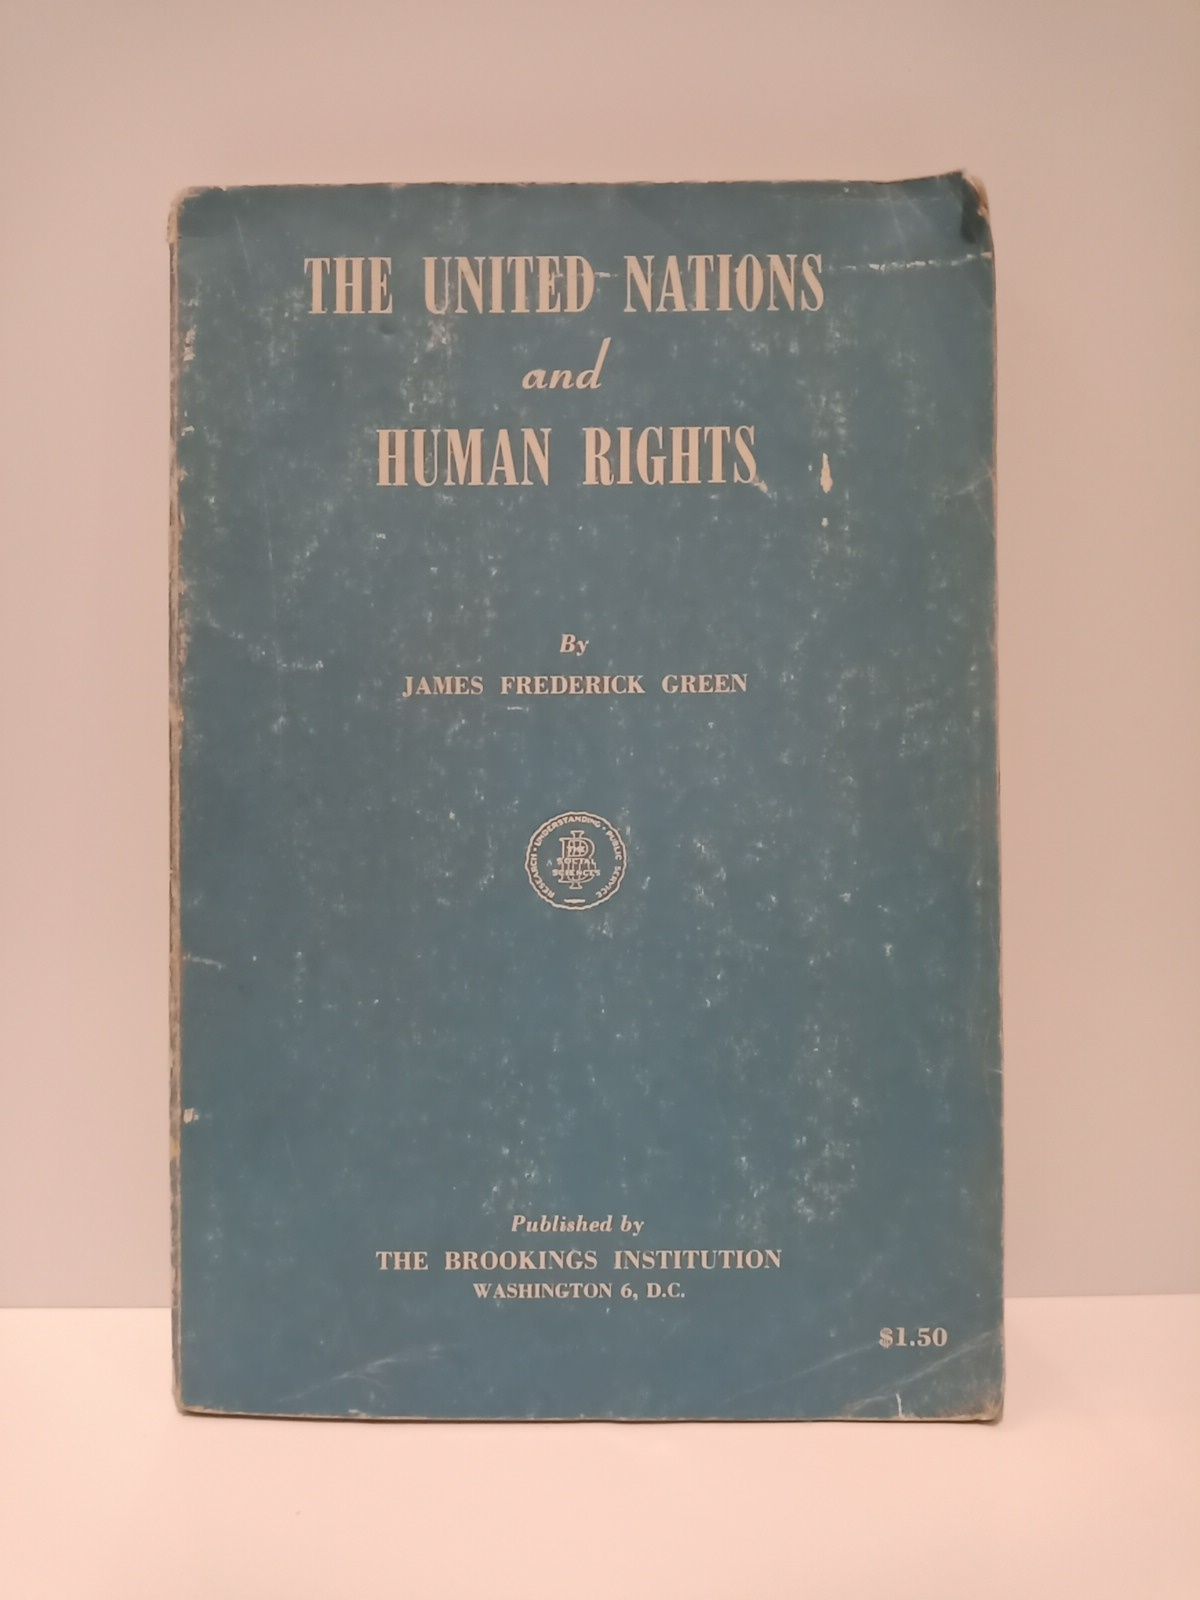 GREEN, James Frederick - The United Nations and Human Rights